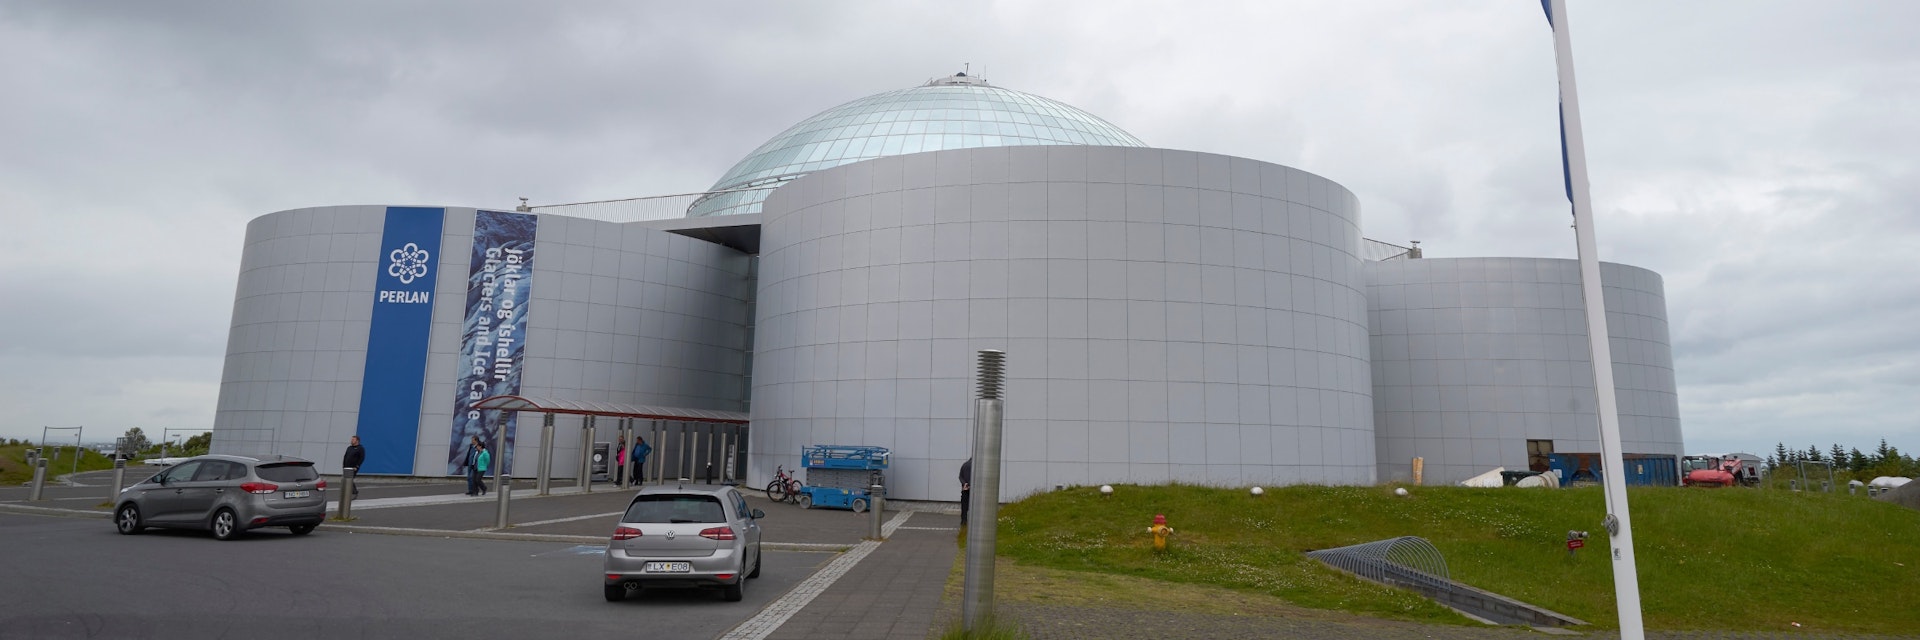 Perlan: Wonders of Iceland museum: Glaicers and Ice Cave